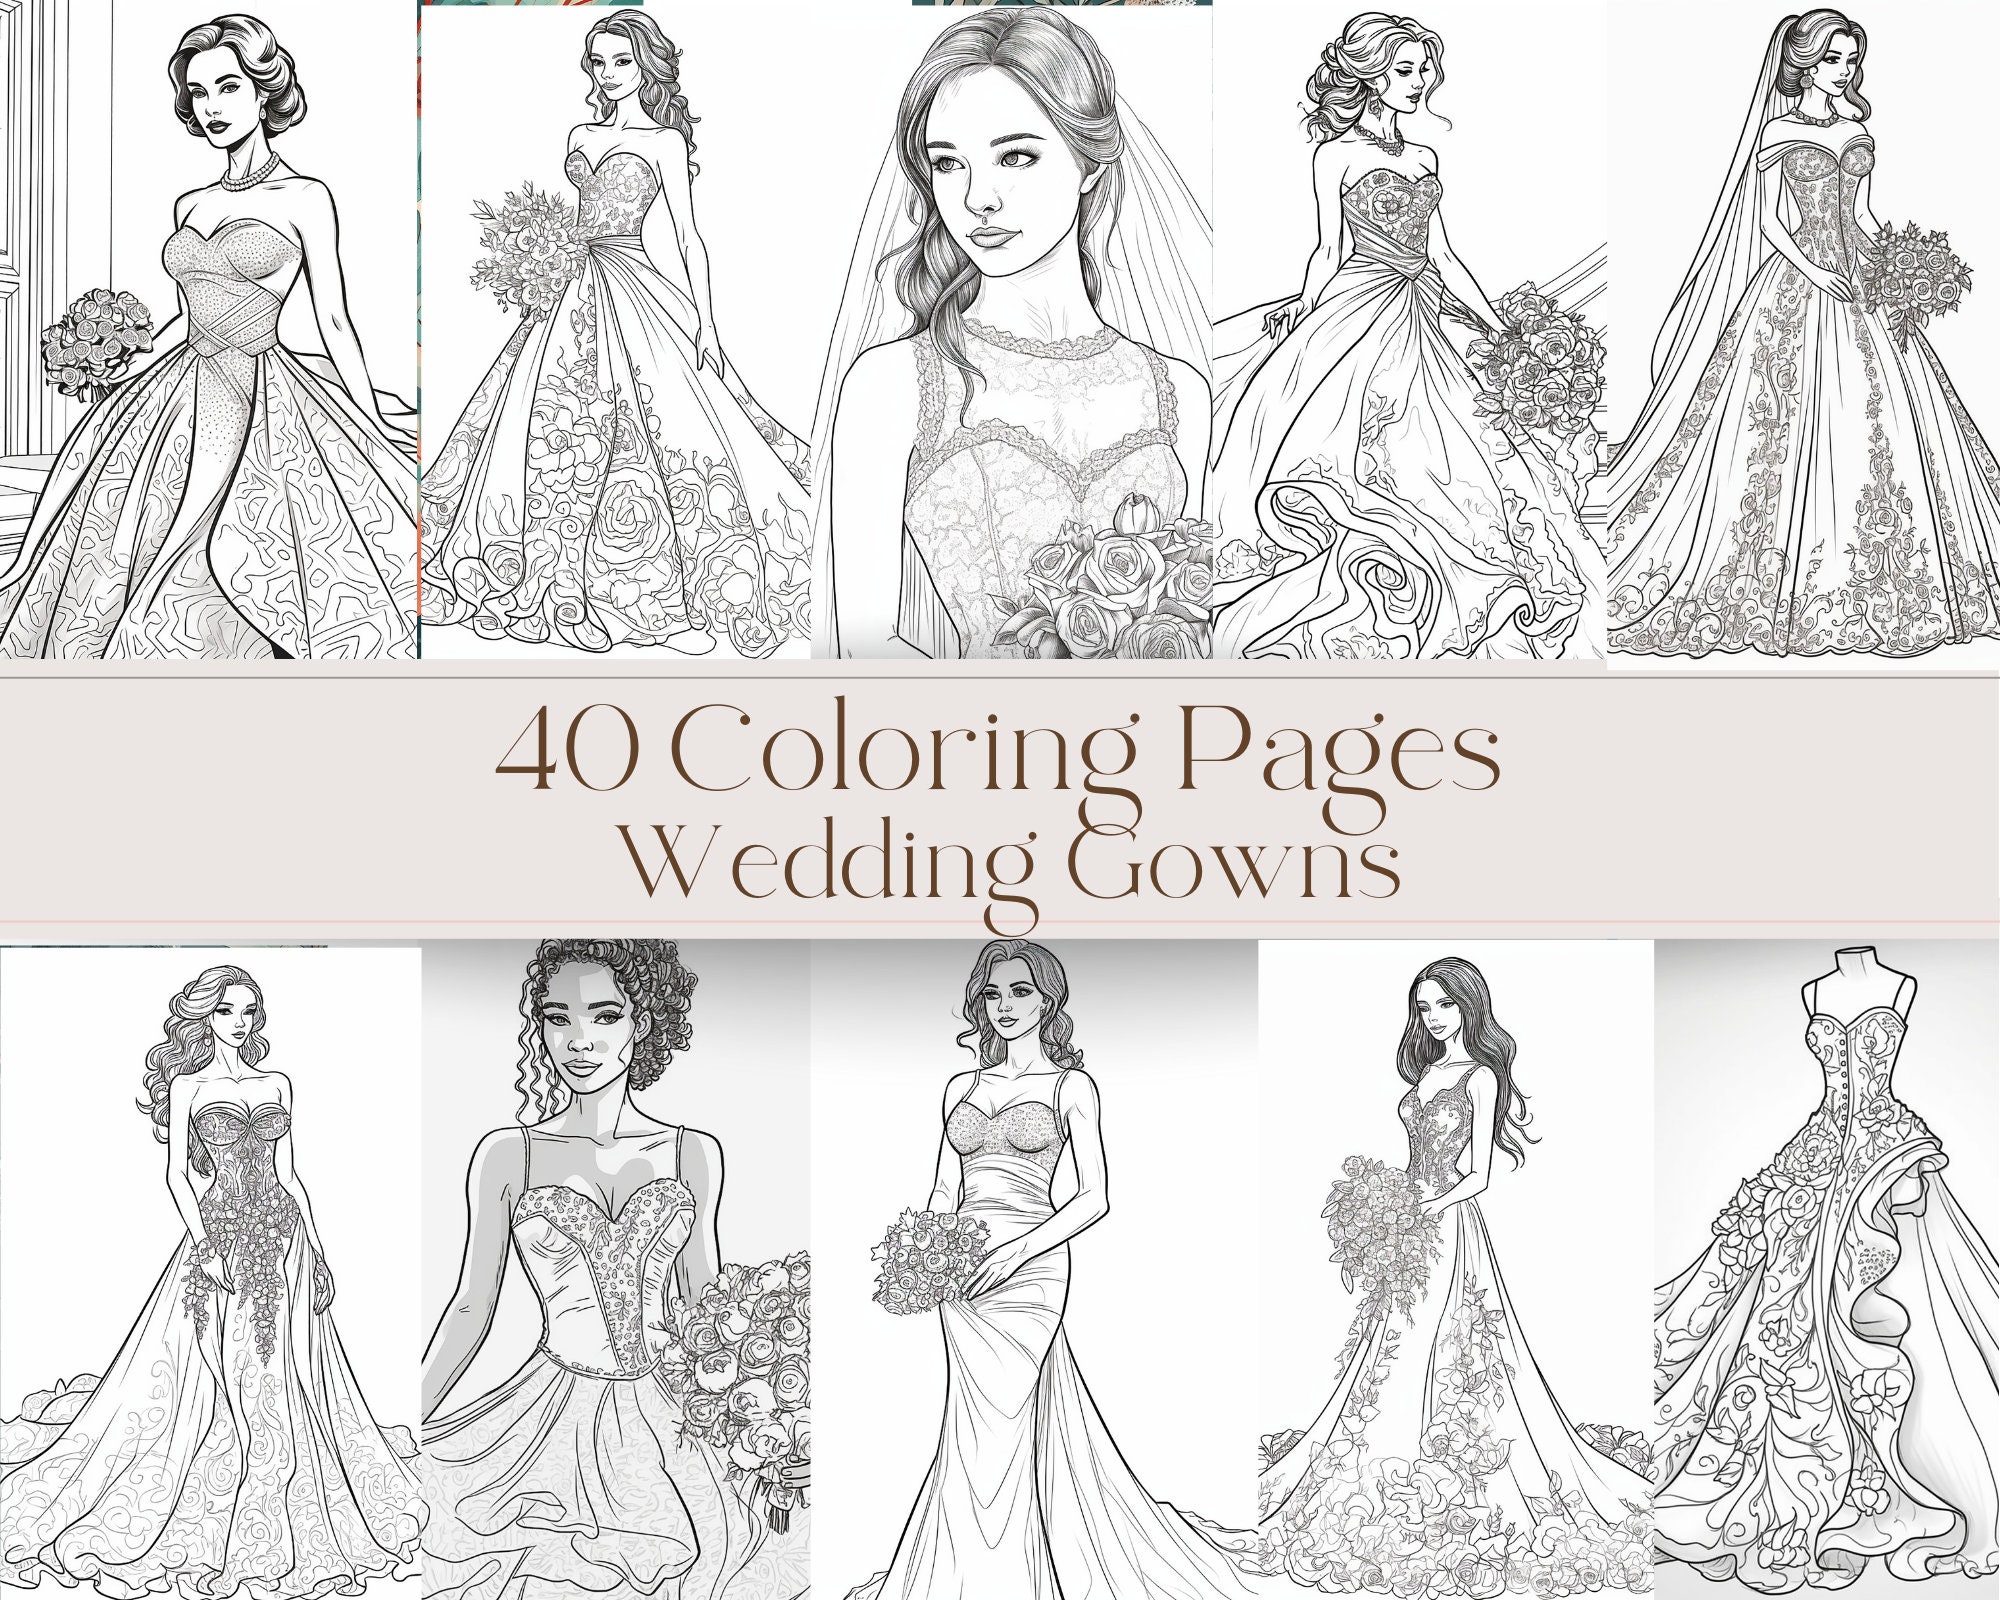 Coloring pages wedding gowns